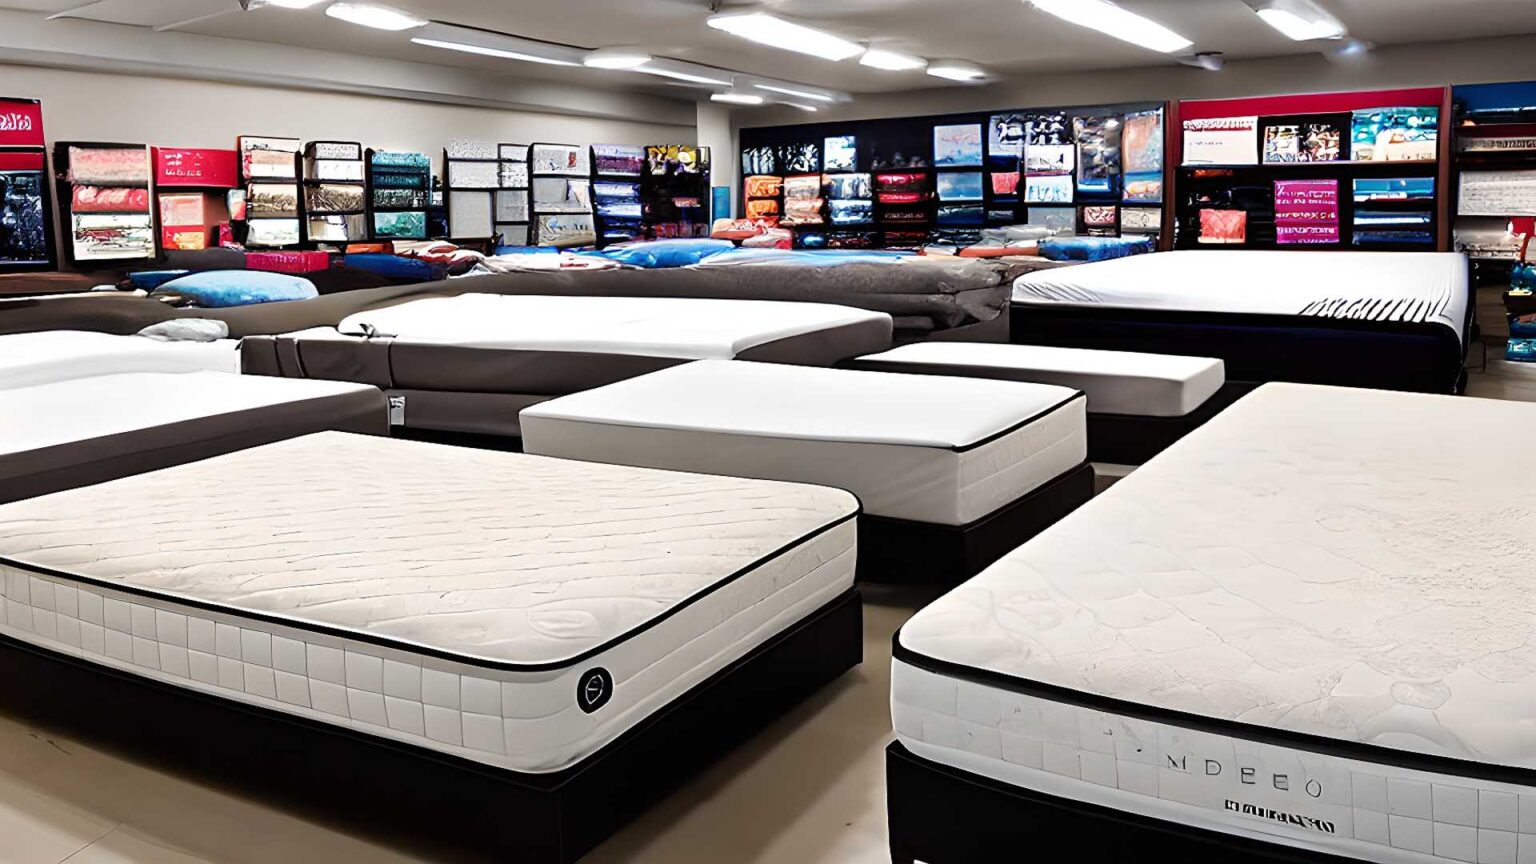 Mattress Stores, mattress dealers, and mattress retailers near me in Daly City, CA